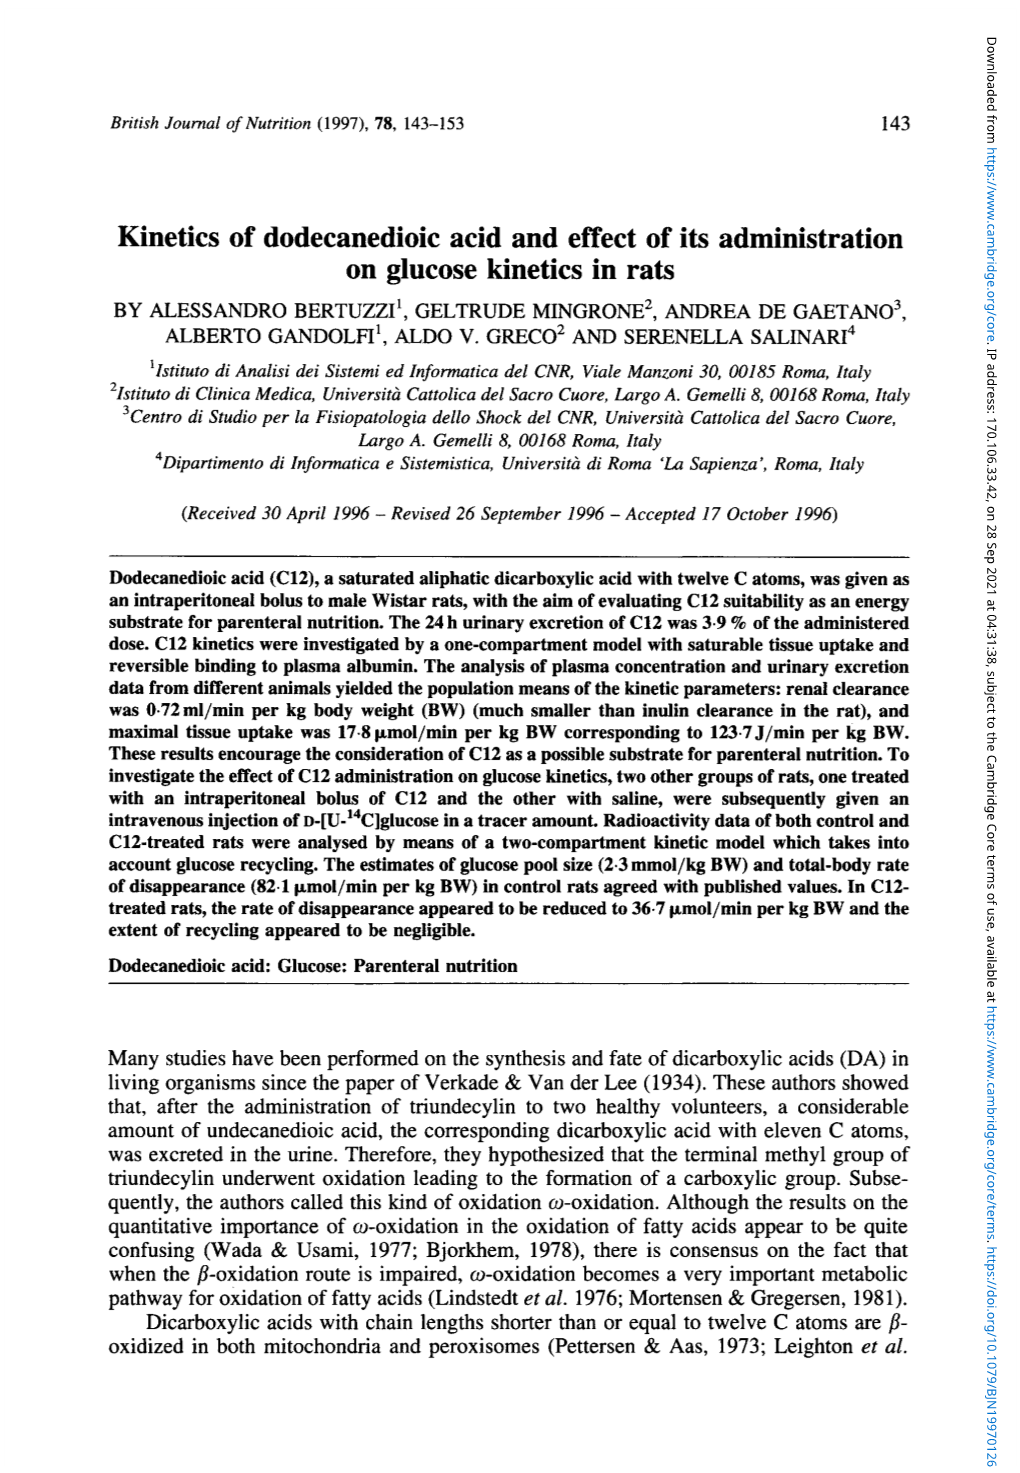 Kinetics of Dodecanedioic Acid and Effect of Its Administration on Glucose Kinetics in Rats by ALESSANDRO BERTUZZI', GELTRUDE MINGRONE', ANDREA DE GAETAN03